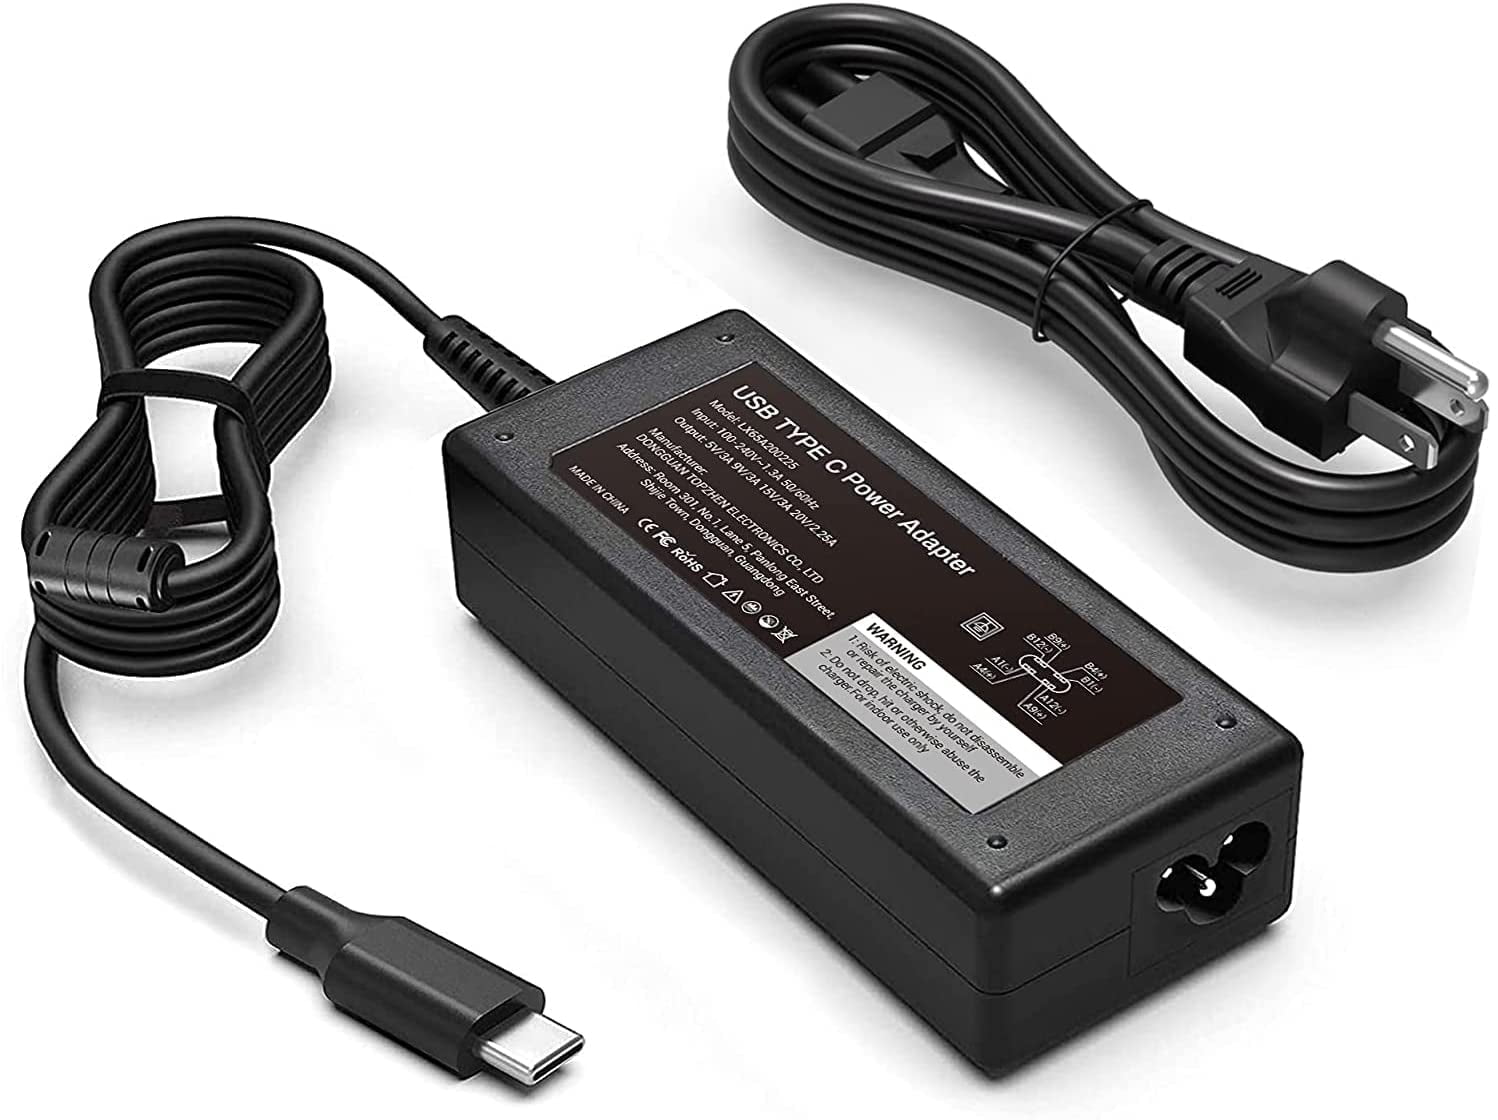 45W Laptop Ac Adapter Charger for Dell inspiron 13 14 15 11 3000 5000 7000  Series 5559 5100 5570 Computer Power Supply Cord 